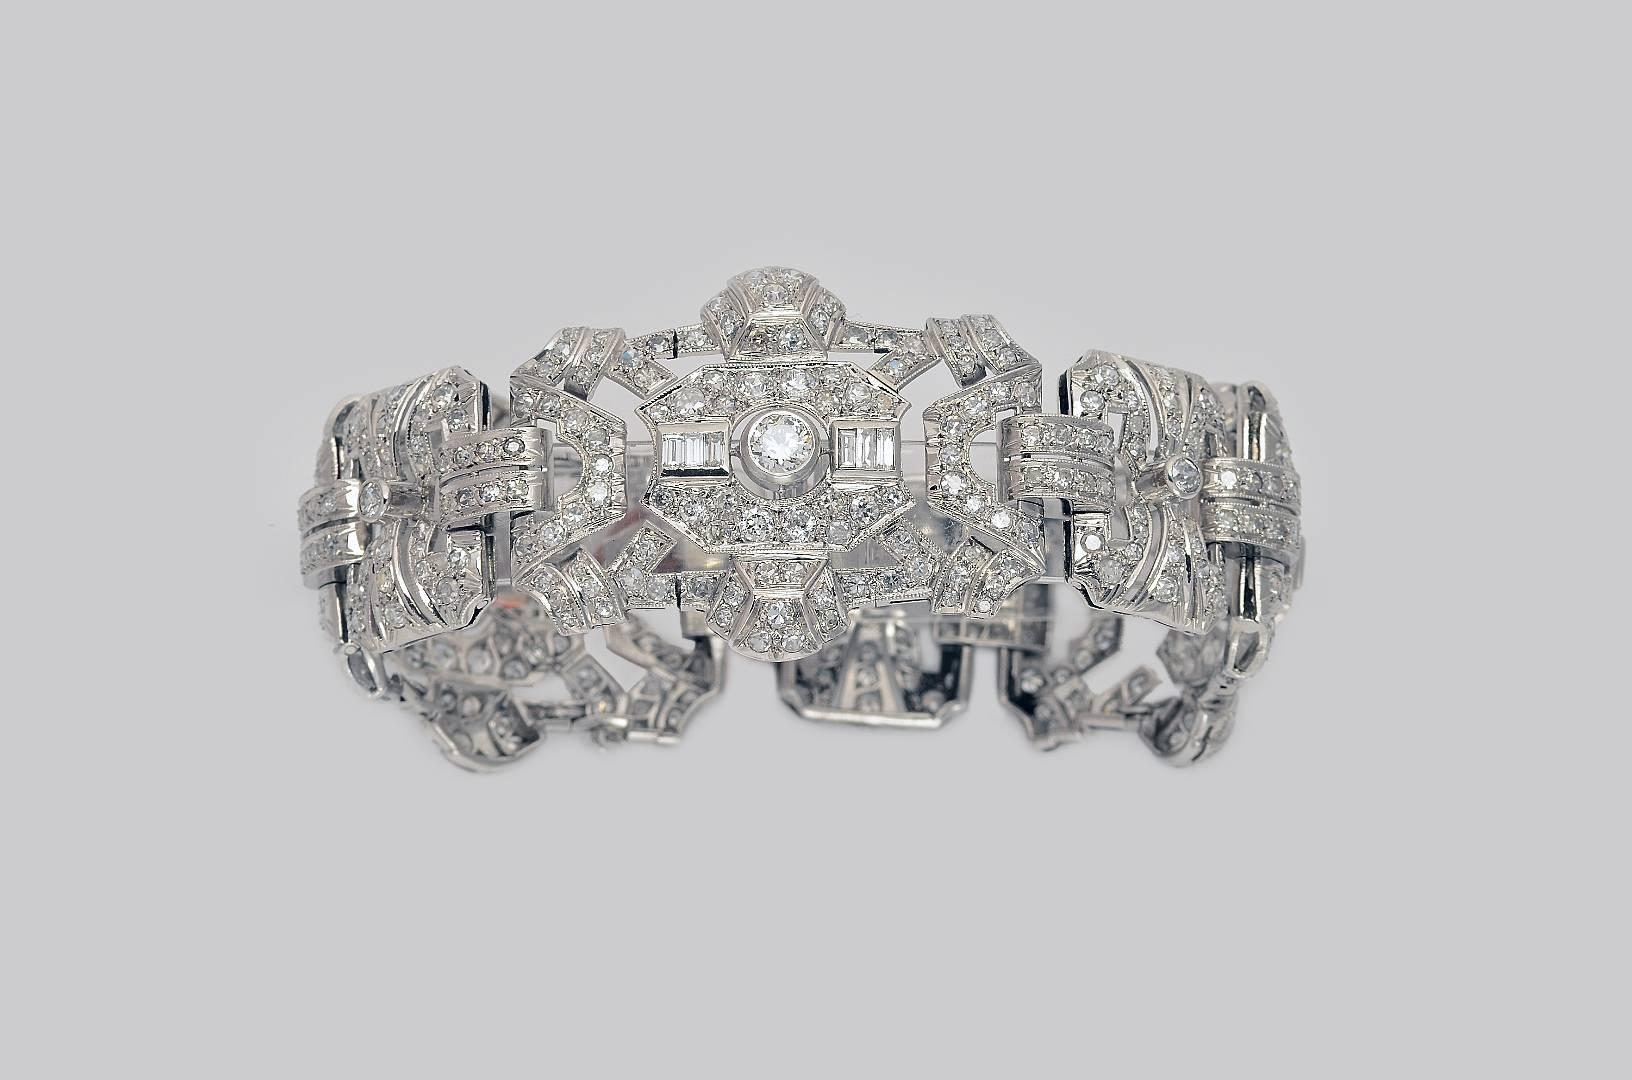 This French Art Deco Bracelet has a beautiful broad strap composed of three geometric designs. It´s made of Platinum with baguette diamonds and brillant cut-diamonds weighing 20 carats. French assay marks.